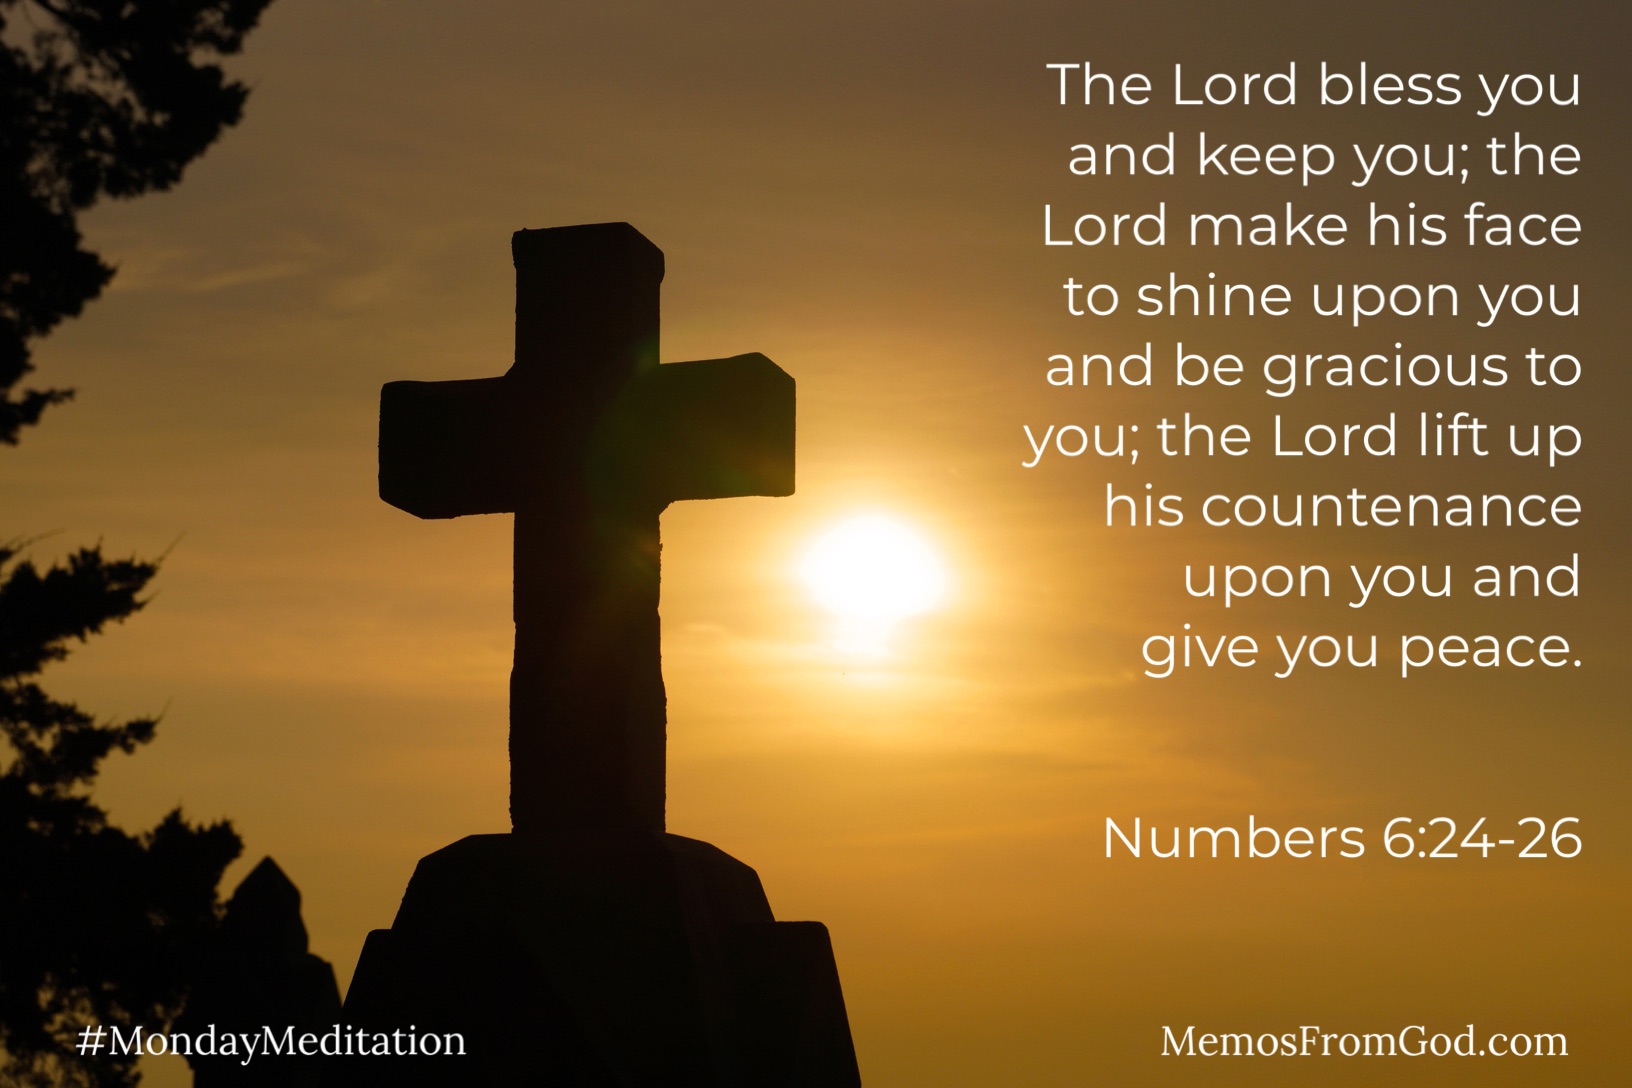 A cross-shaped monument silhouetted against a golden sky. Caption: The Lord bless you and keep you; the Lord make his face to shine upon you and be gracious to you; the Lord lift up his countenance upon you and give you peace. Numbers 6:24-26